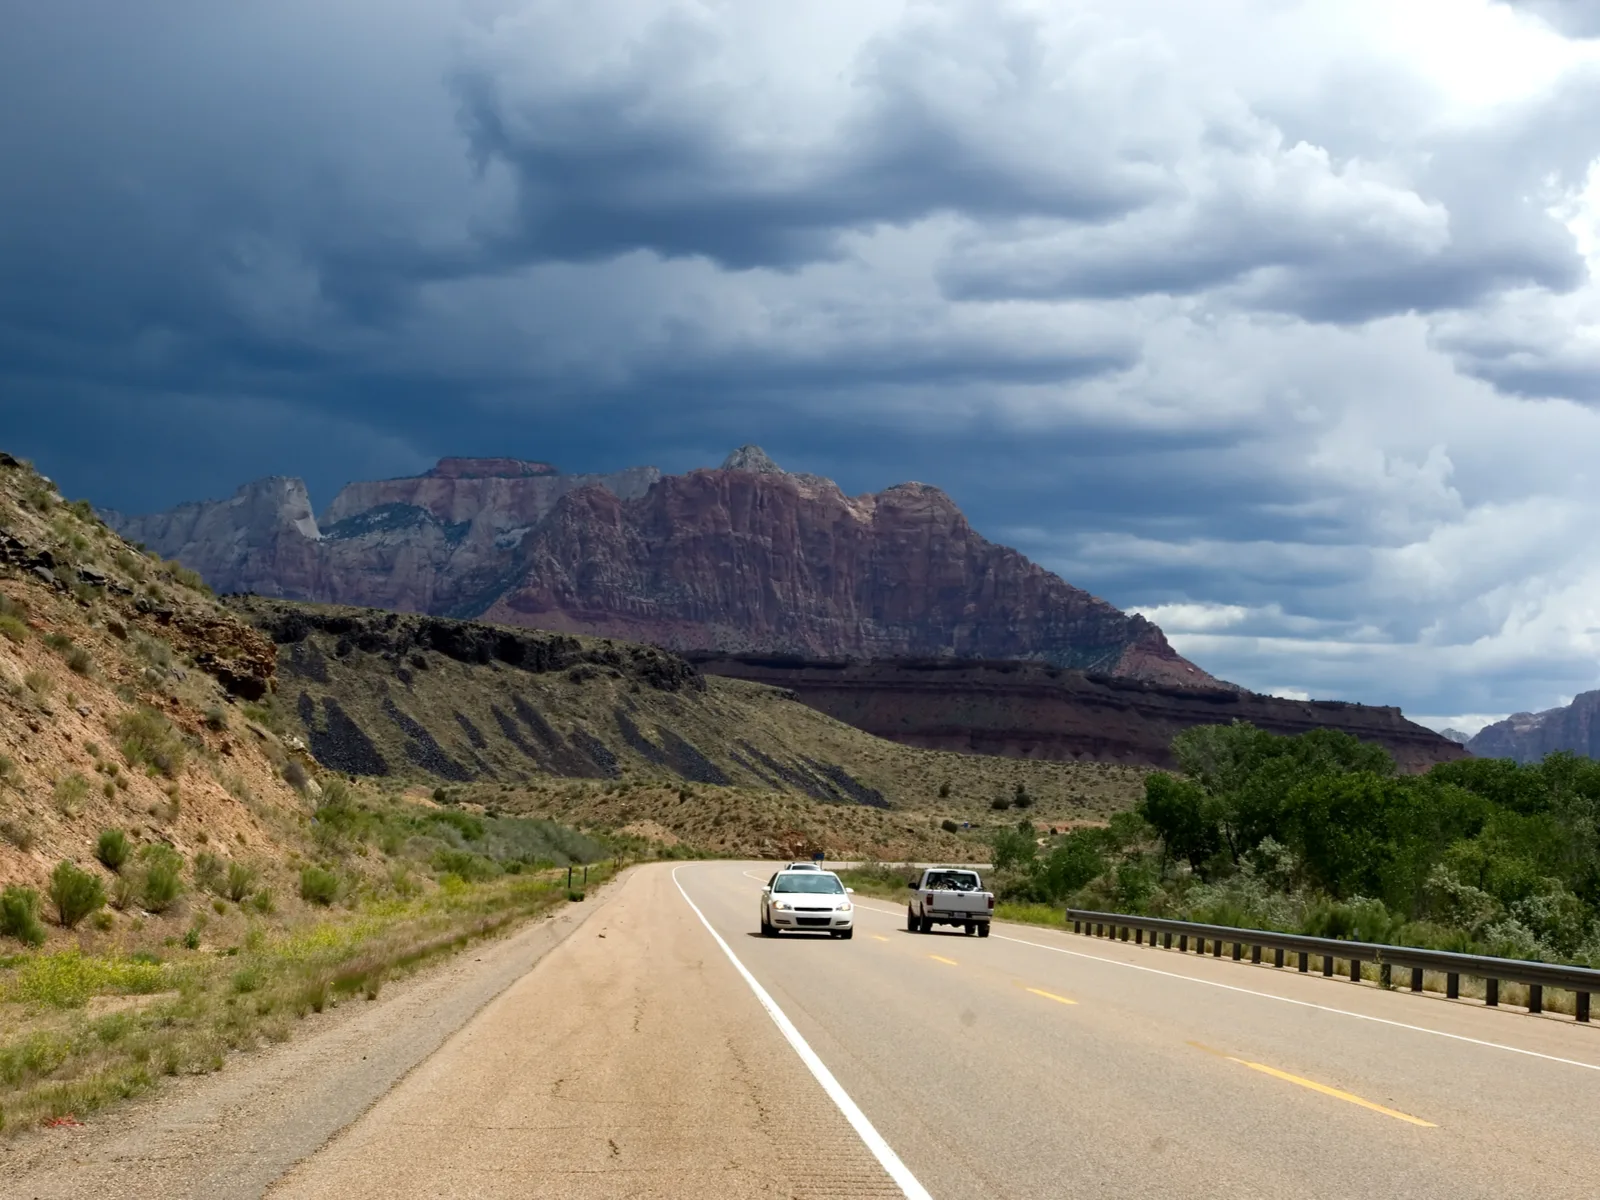 Thunderstorm over Zion National Park during the worst time to visit